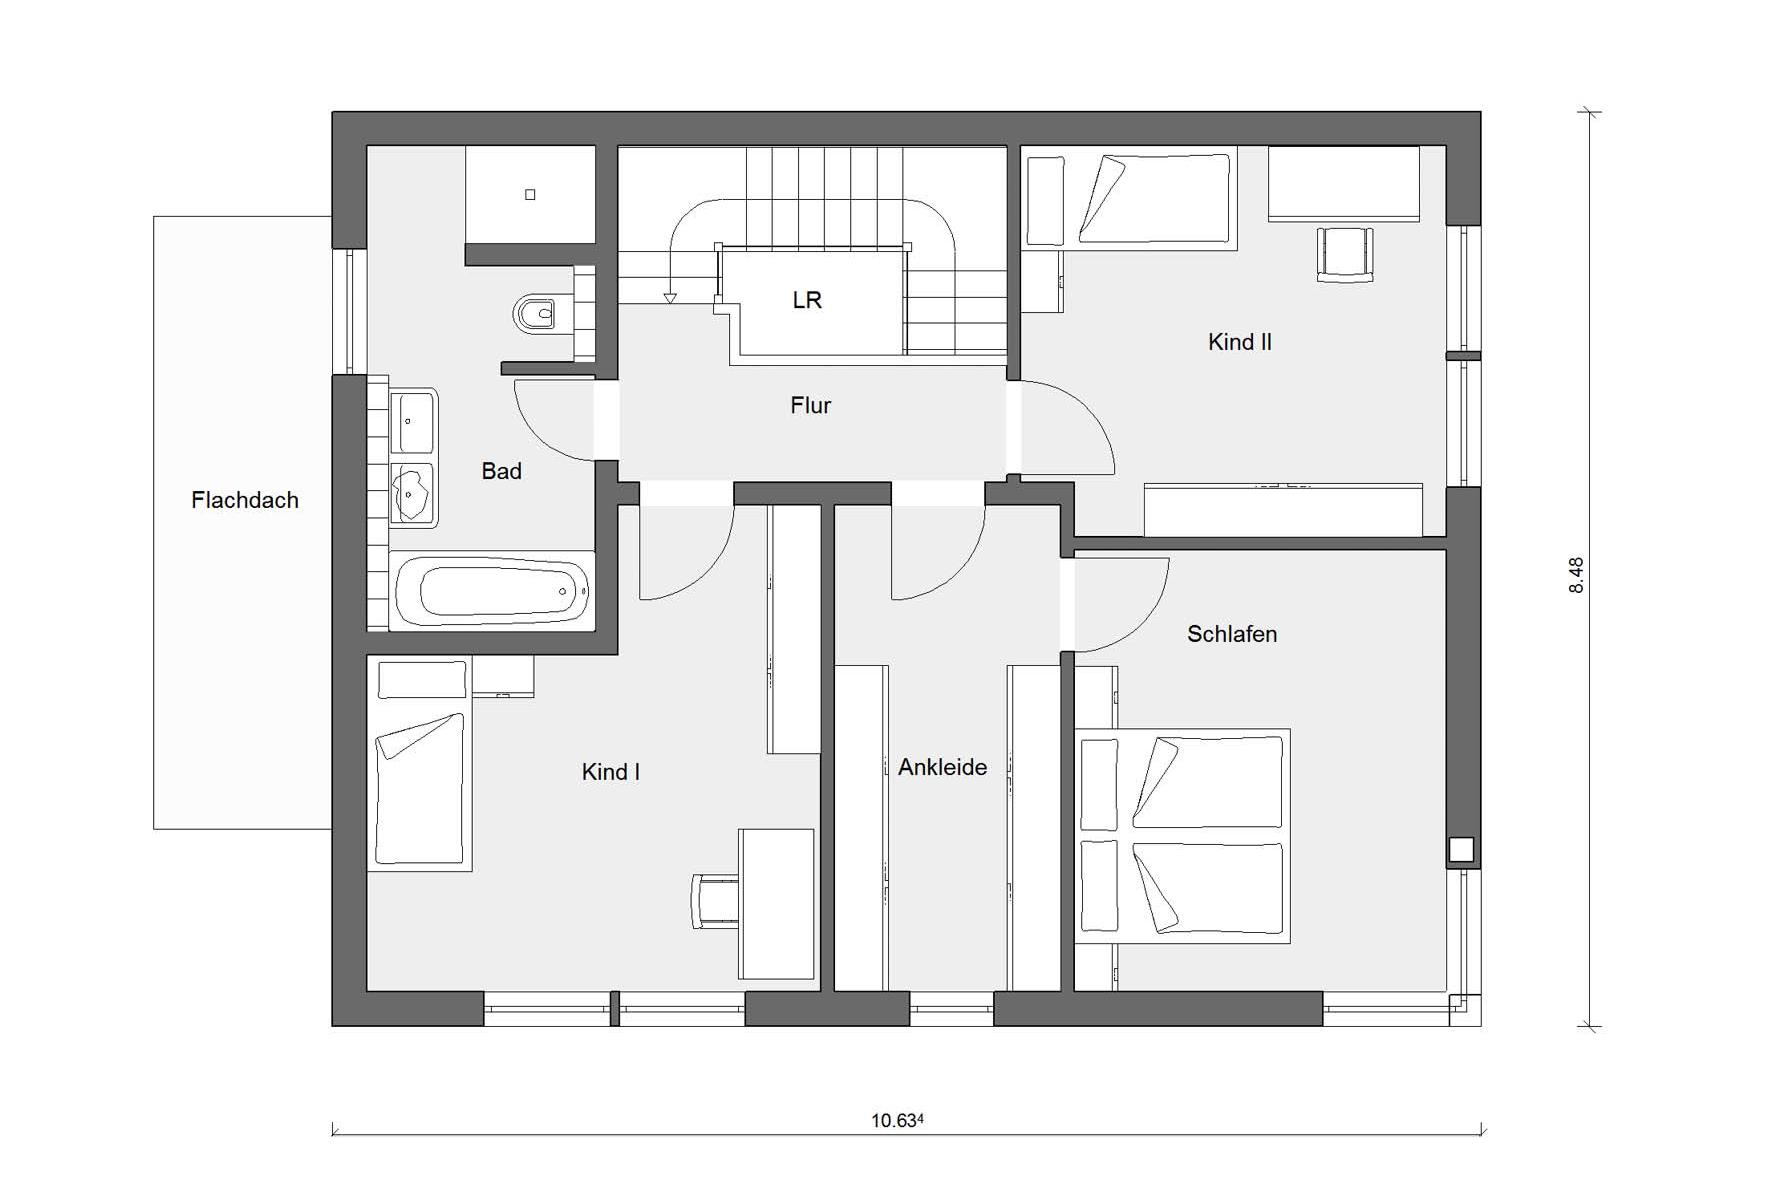 Attic floor plan house in red E 20-148.6